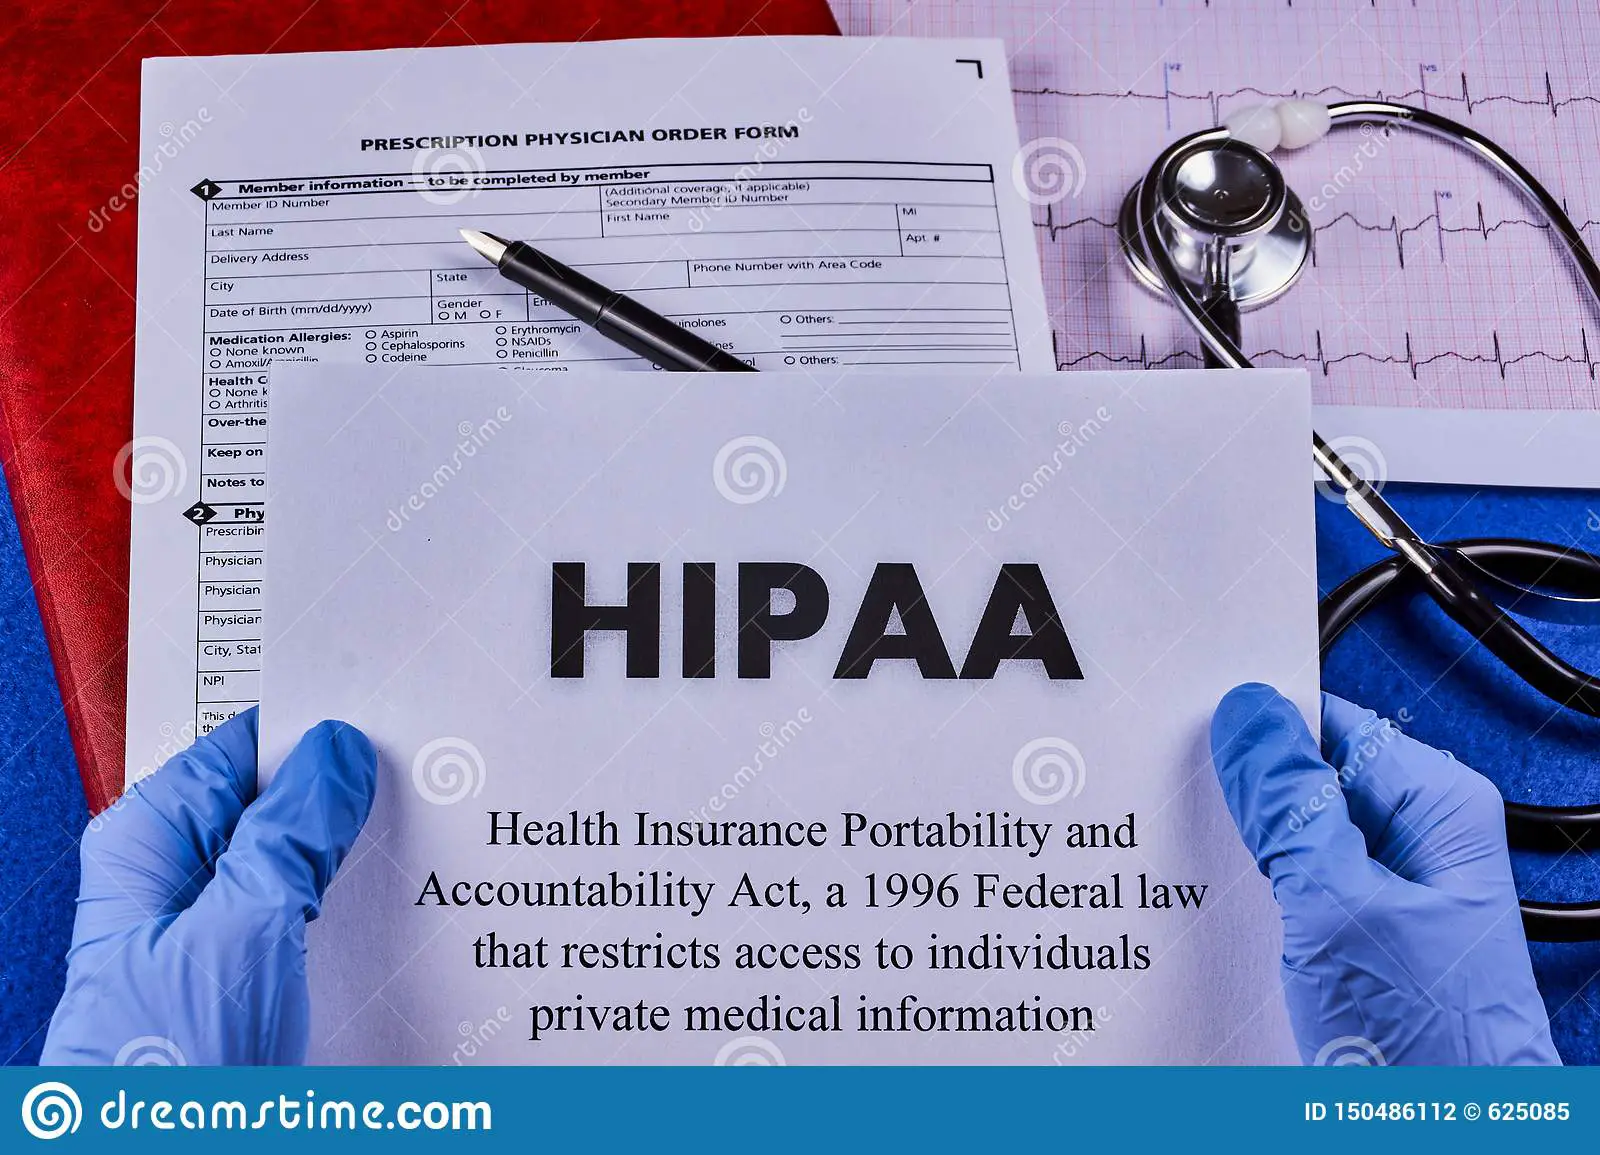 What Is The Health Insurance Portability And Accountability Act